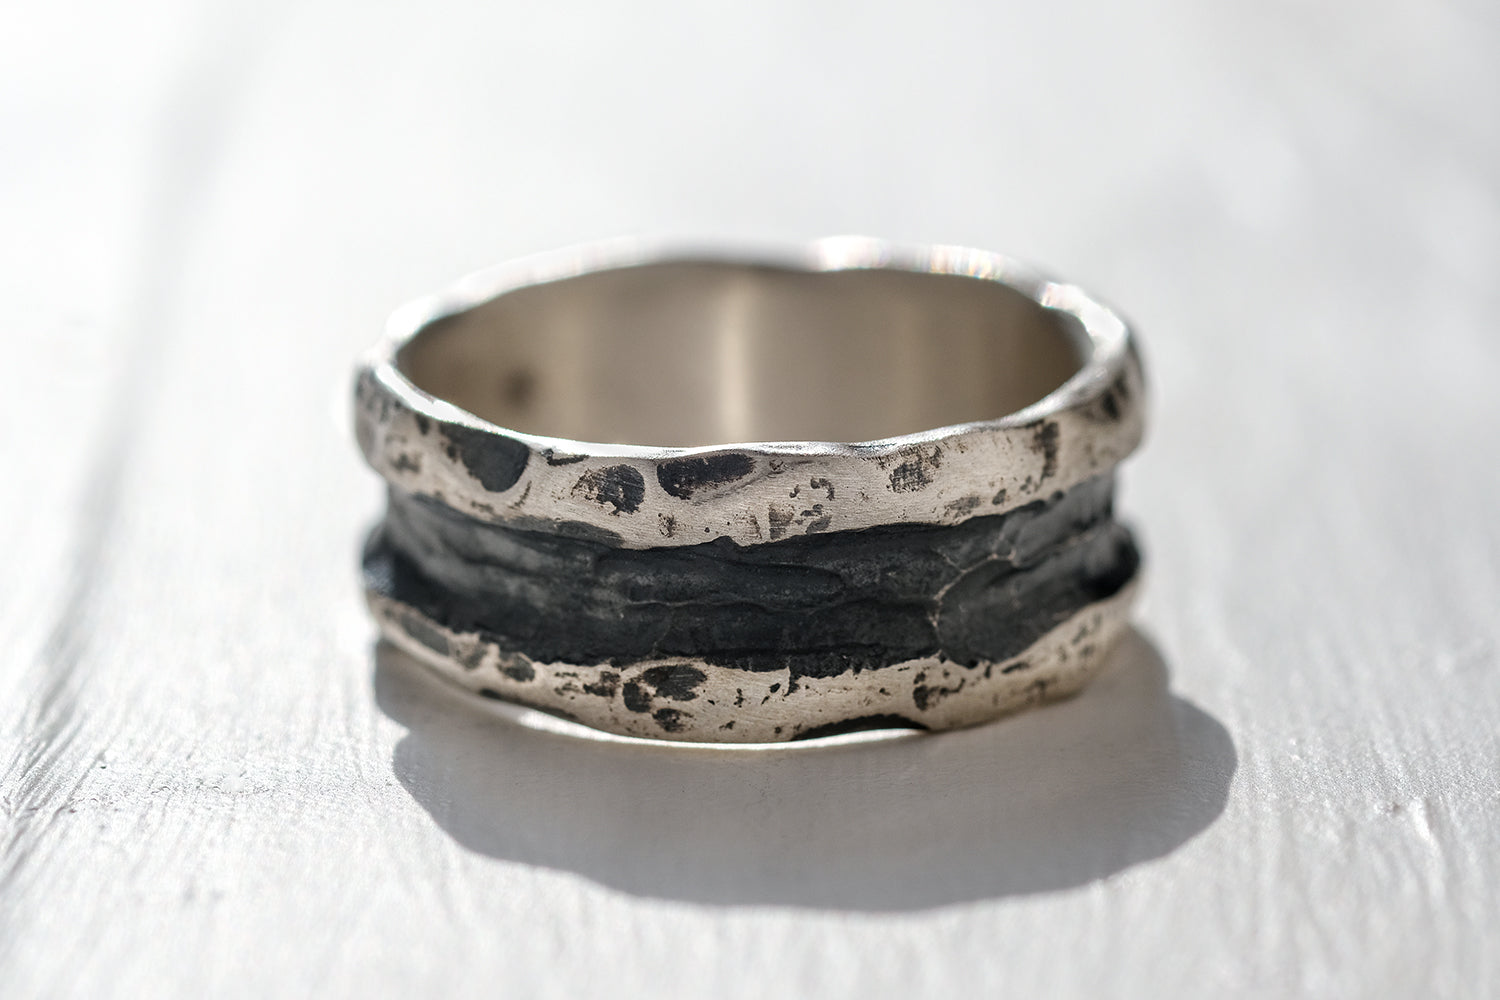 Silver Ring For Men - Hammered Finish With A Central Crevasse